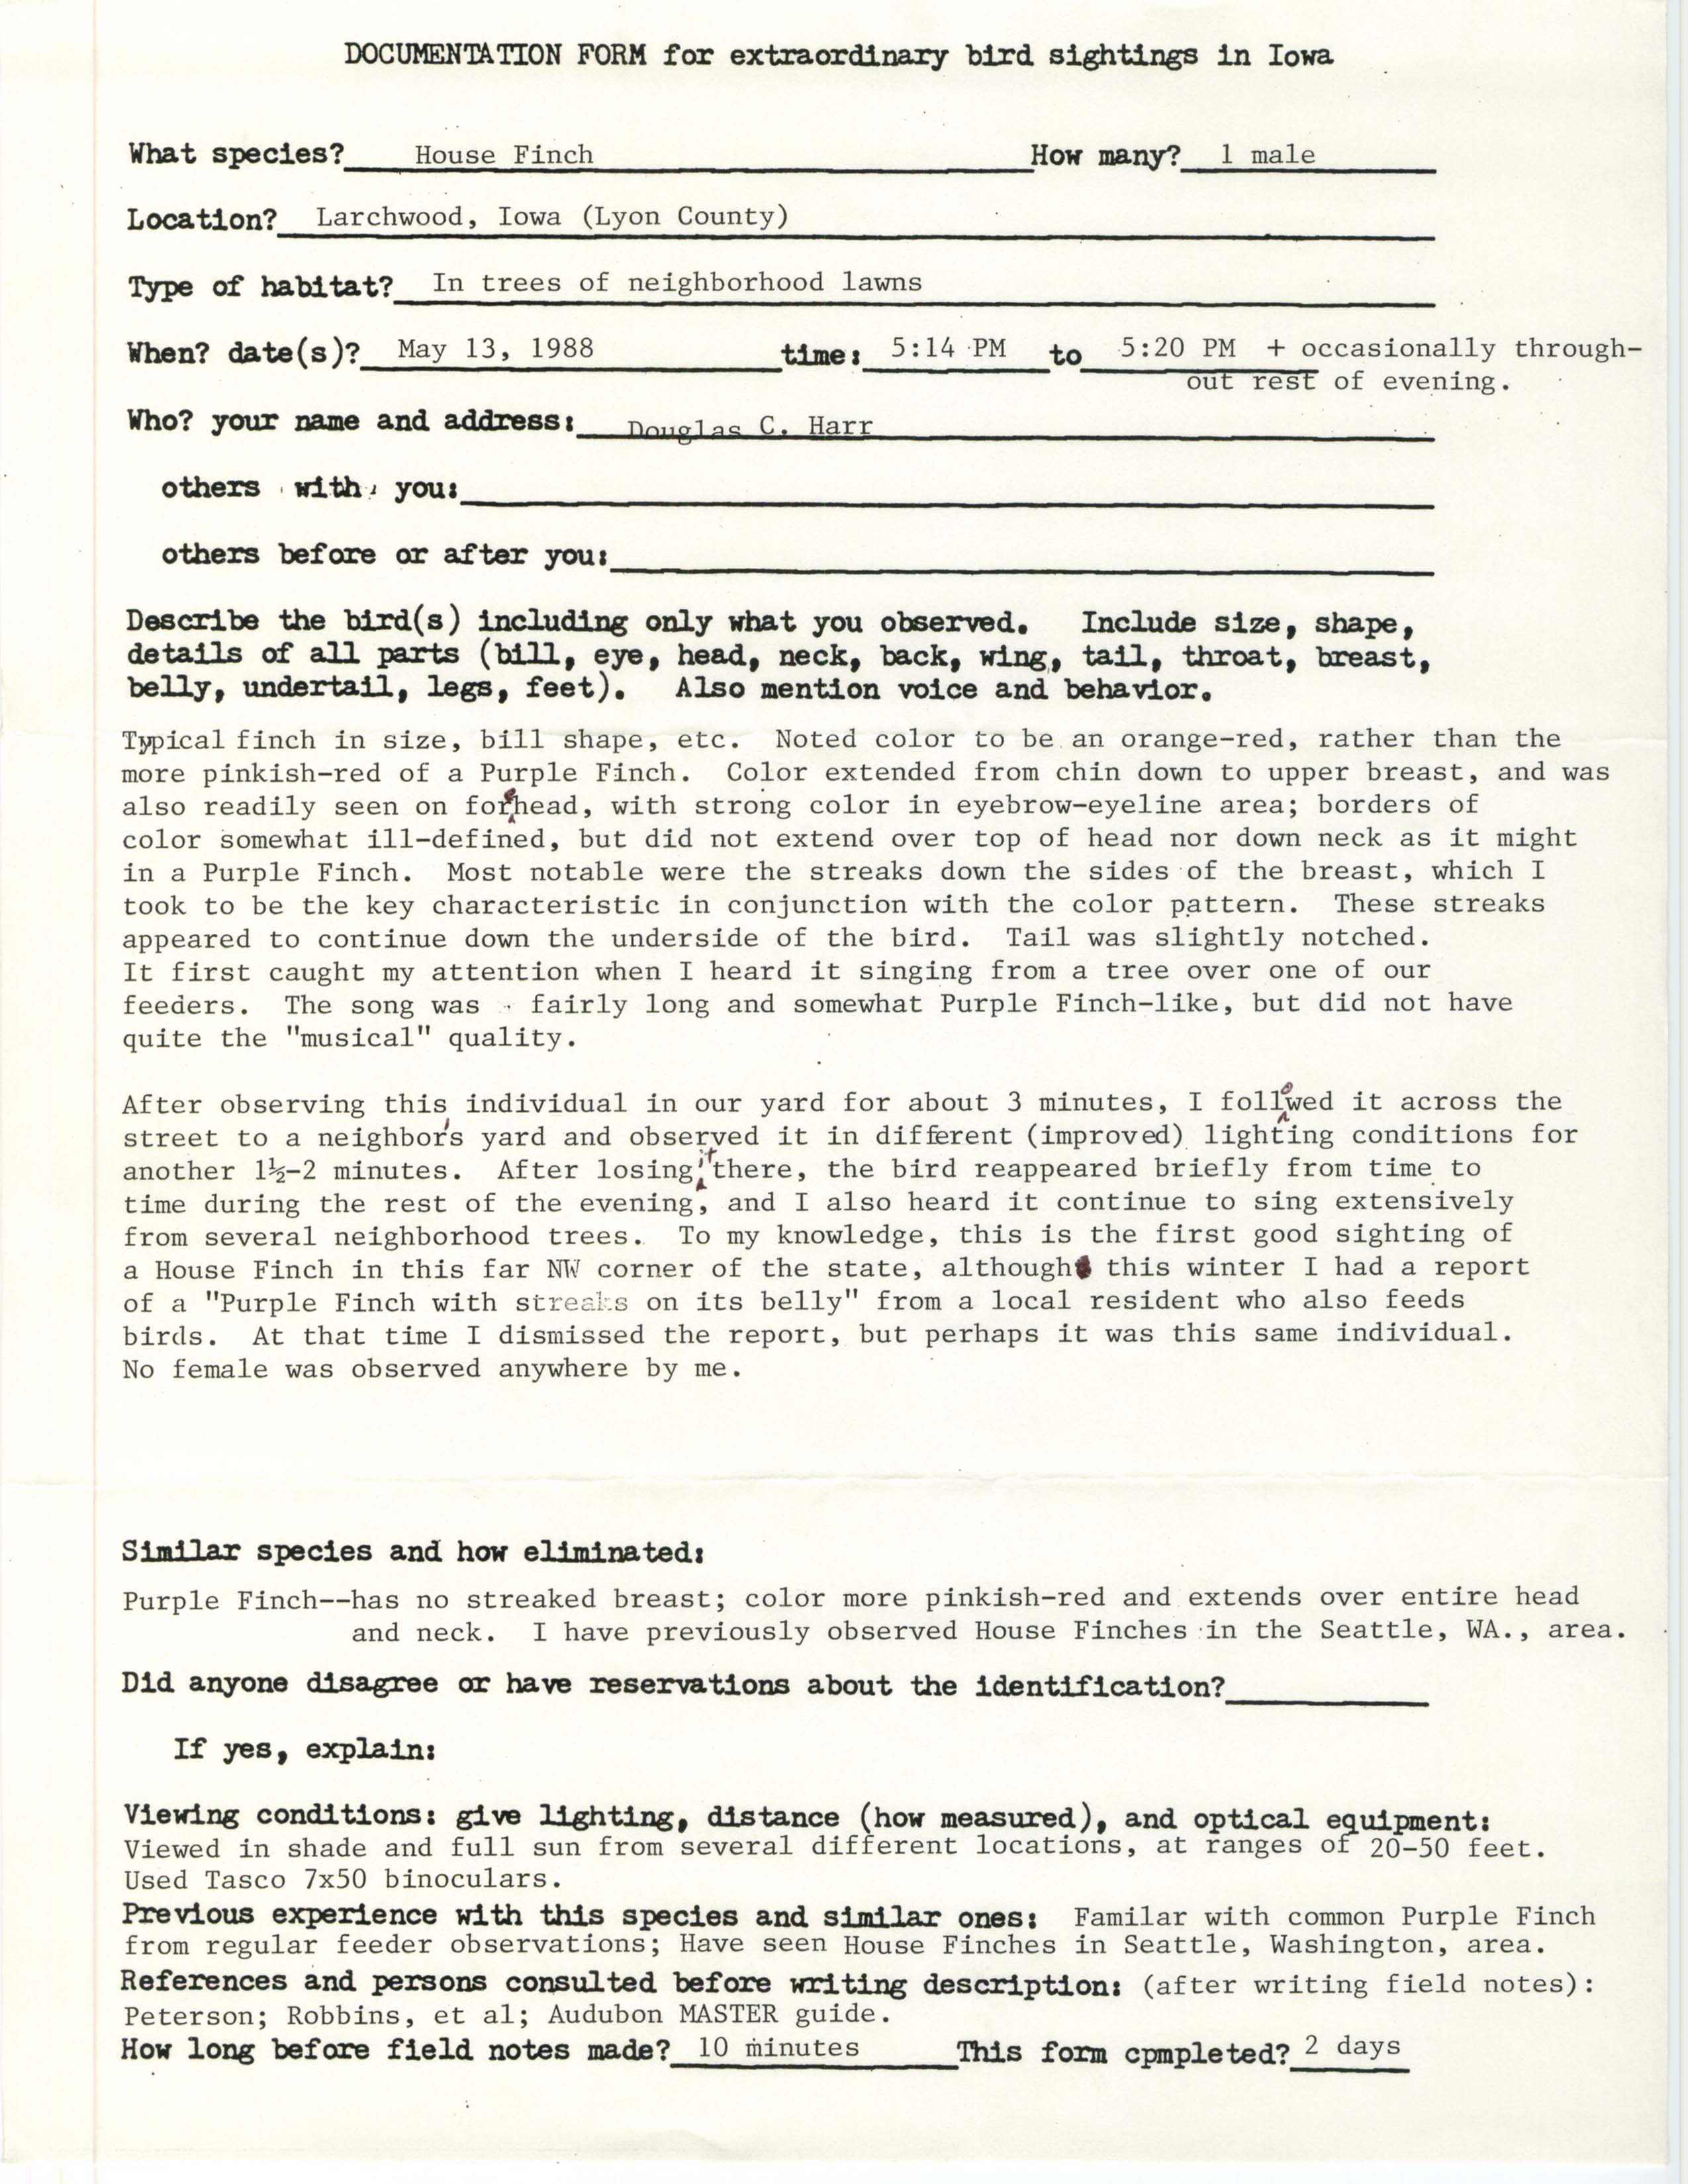 Rare bird documentation form for House Finch at Larchwood, 1988